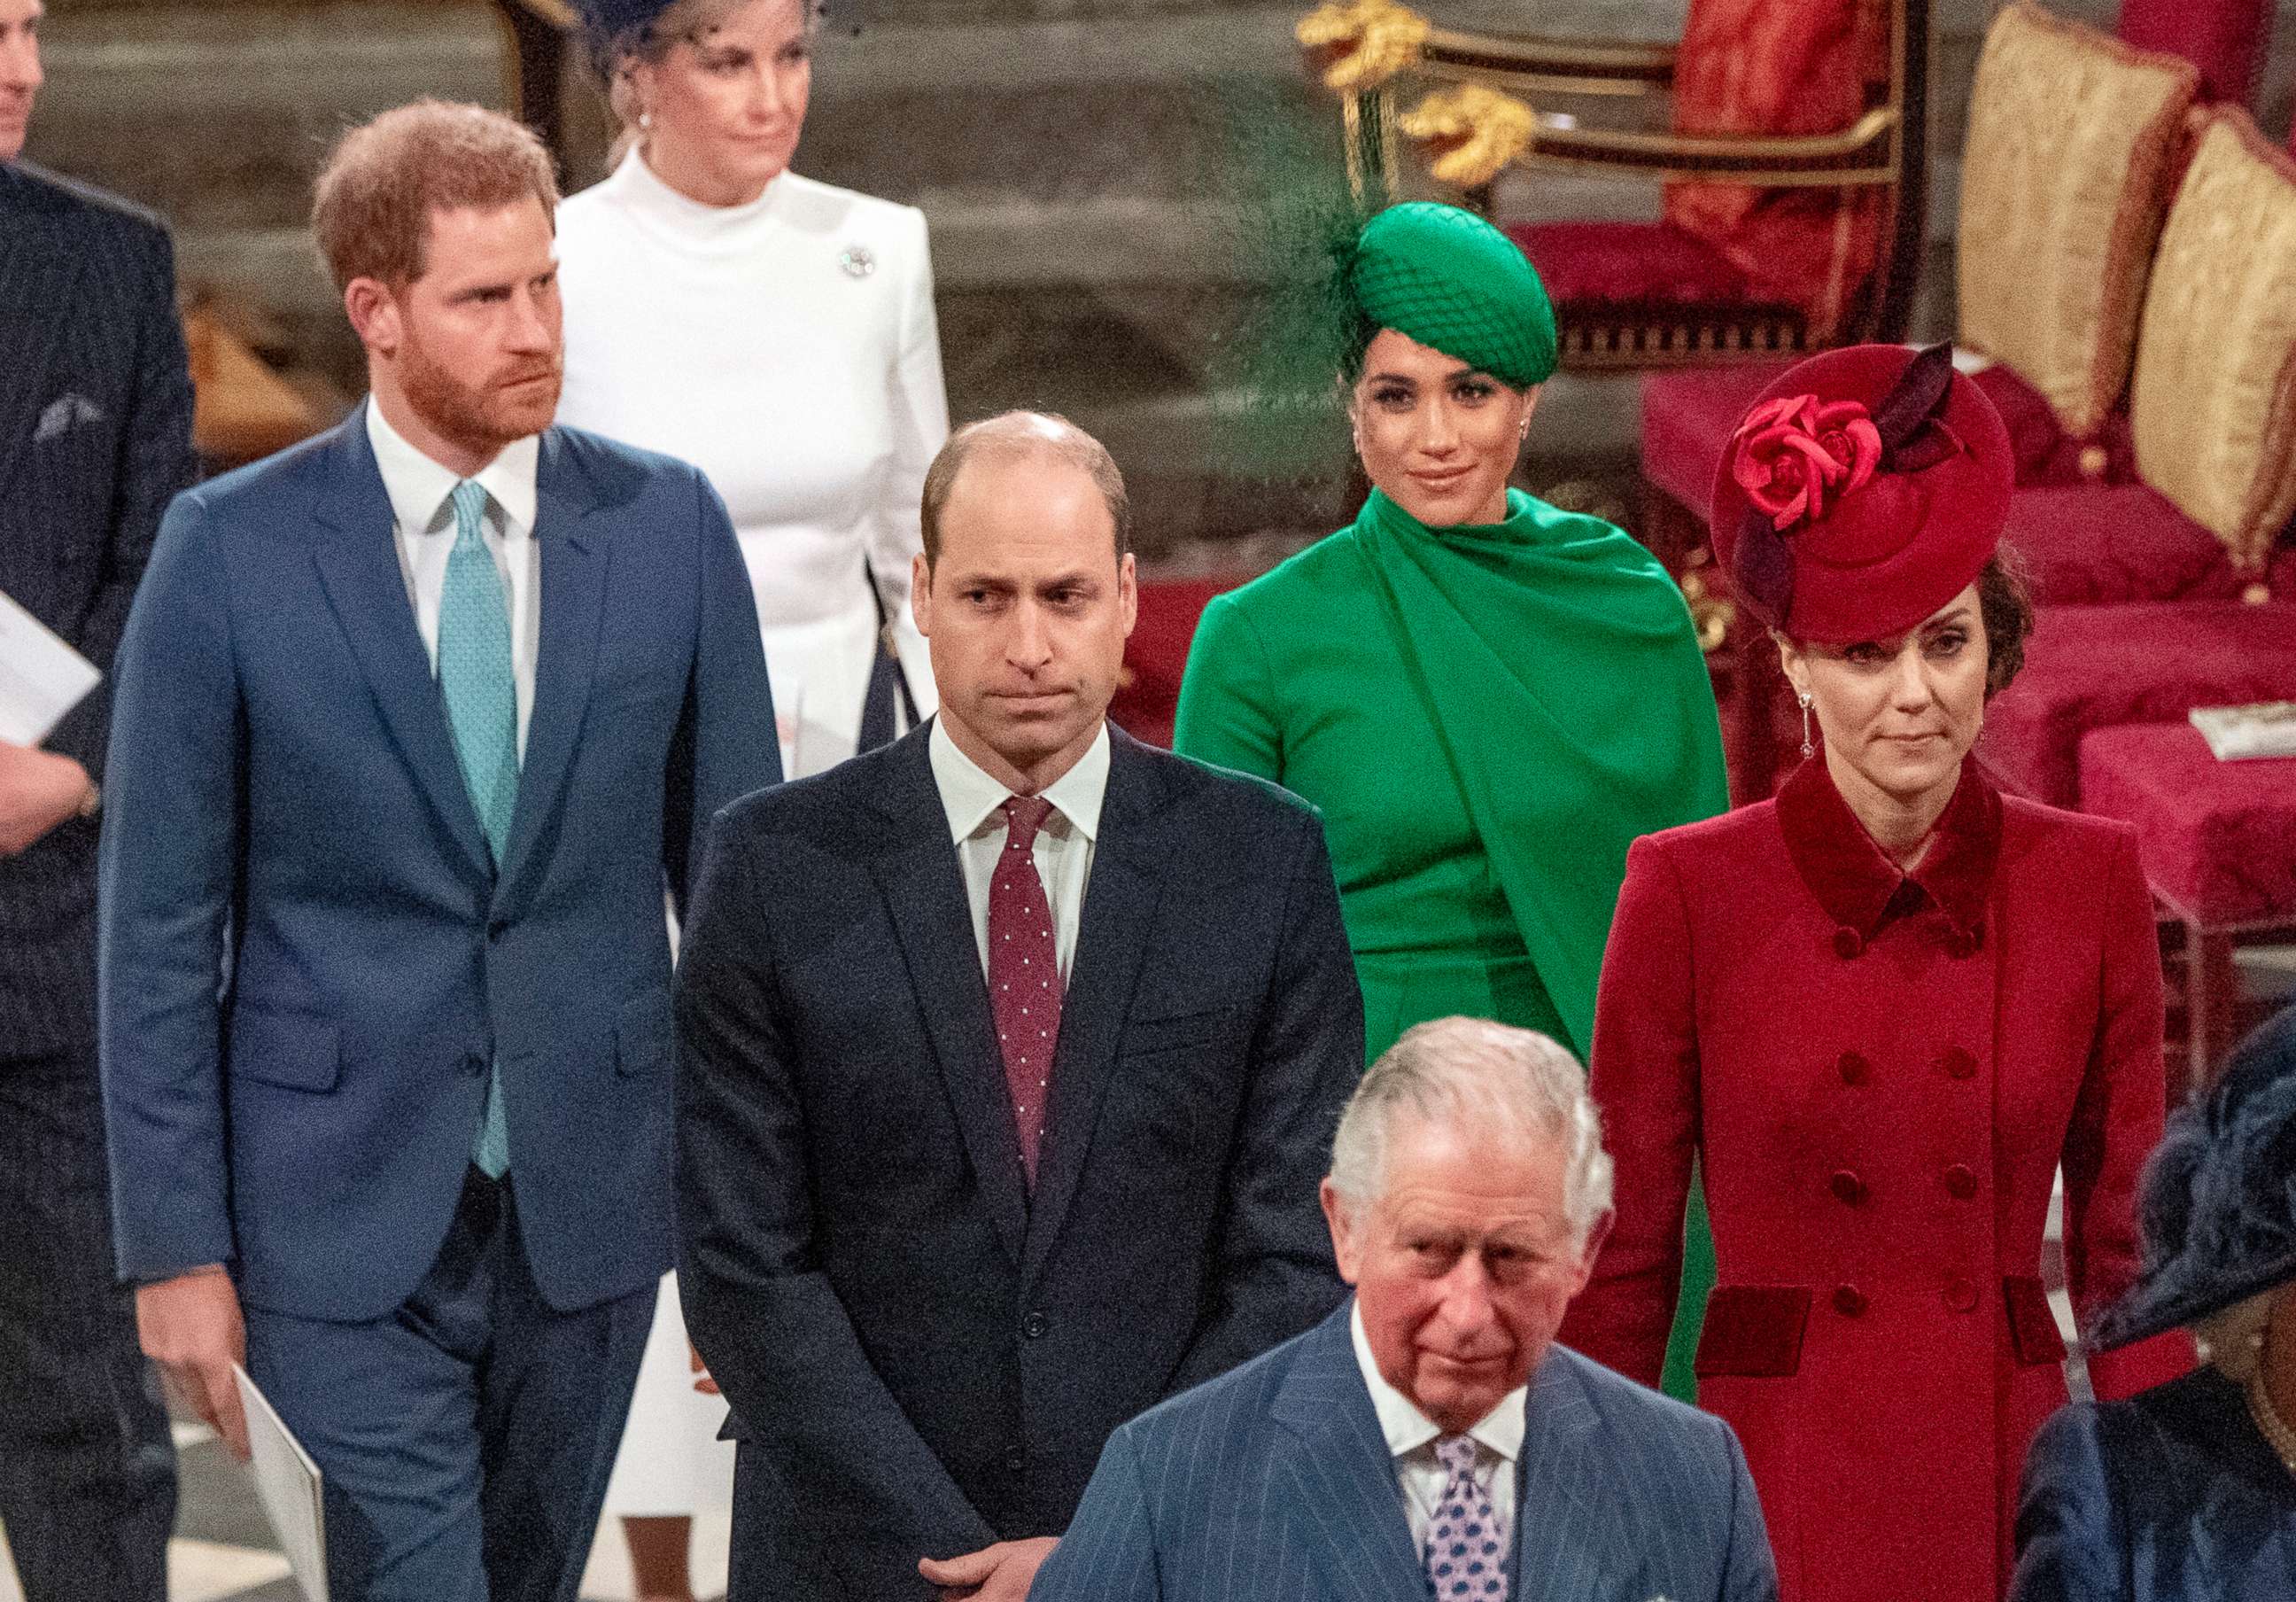 PHOTO: Prince Harry, Duke of Sussex, Meghan, Duchess of Sussex, Prince William, Duke of Cambridge, Catherine, Duchess of Cambridge and Prince Charles, Prince of Wales attend the Commonwealth Day Service 2020 on March 9, 2020, in London.